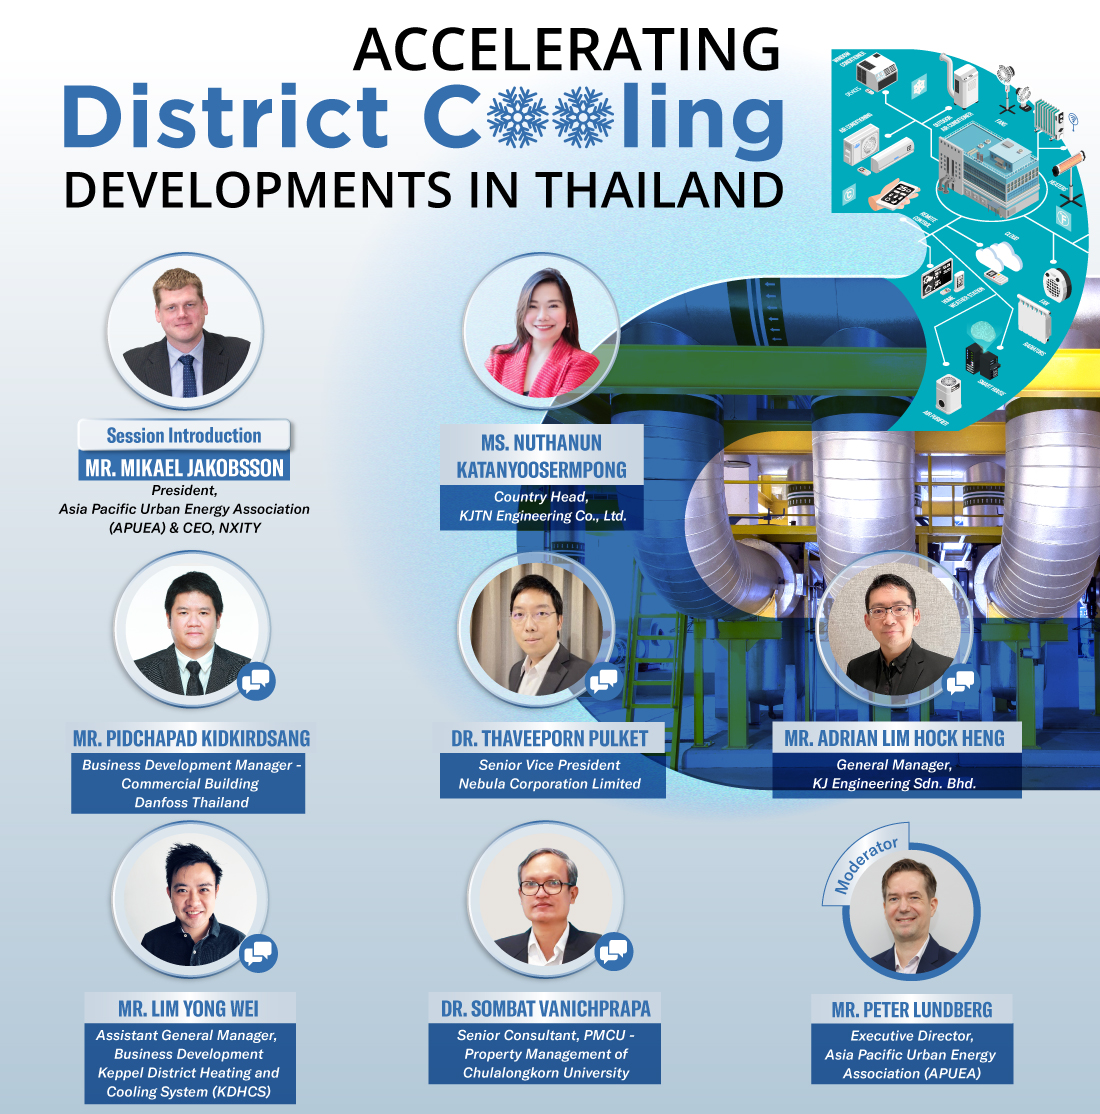 Accelerating District Cooling Developments in Thailand